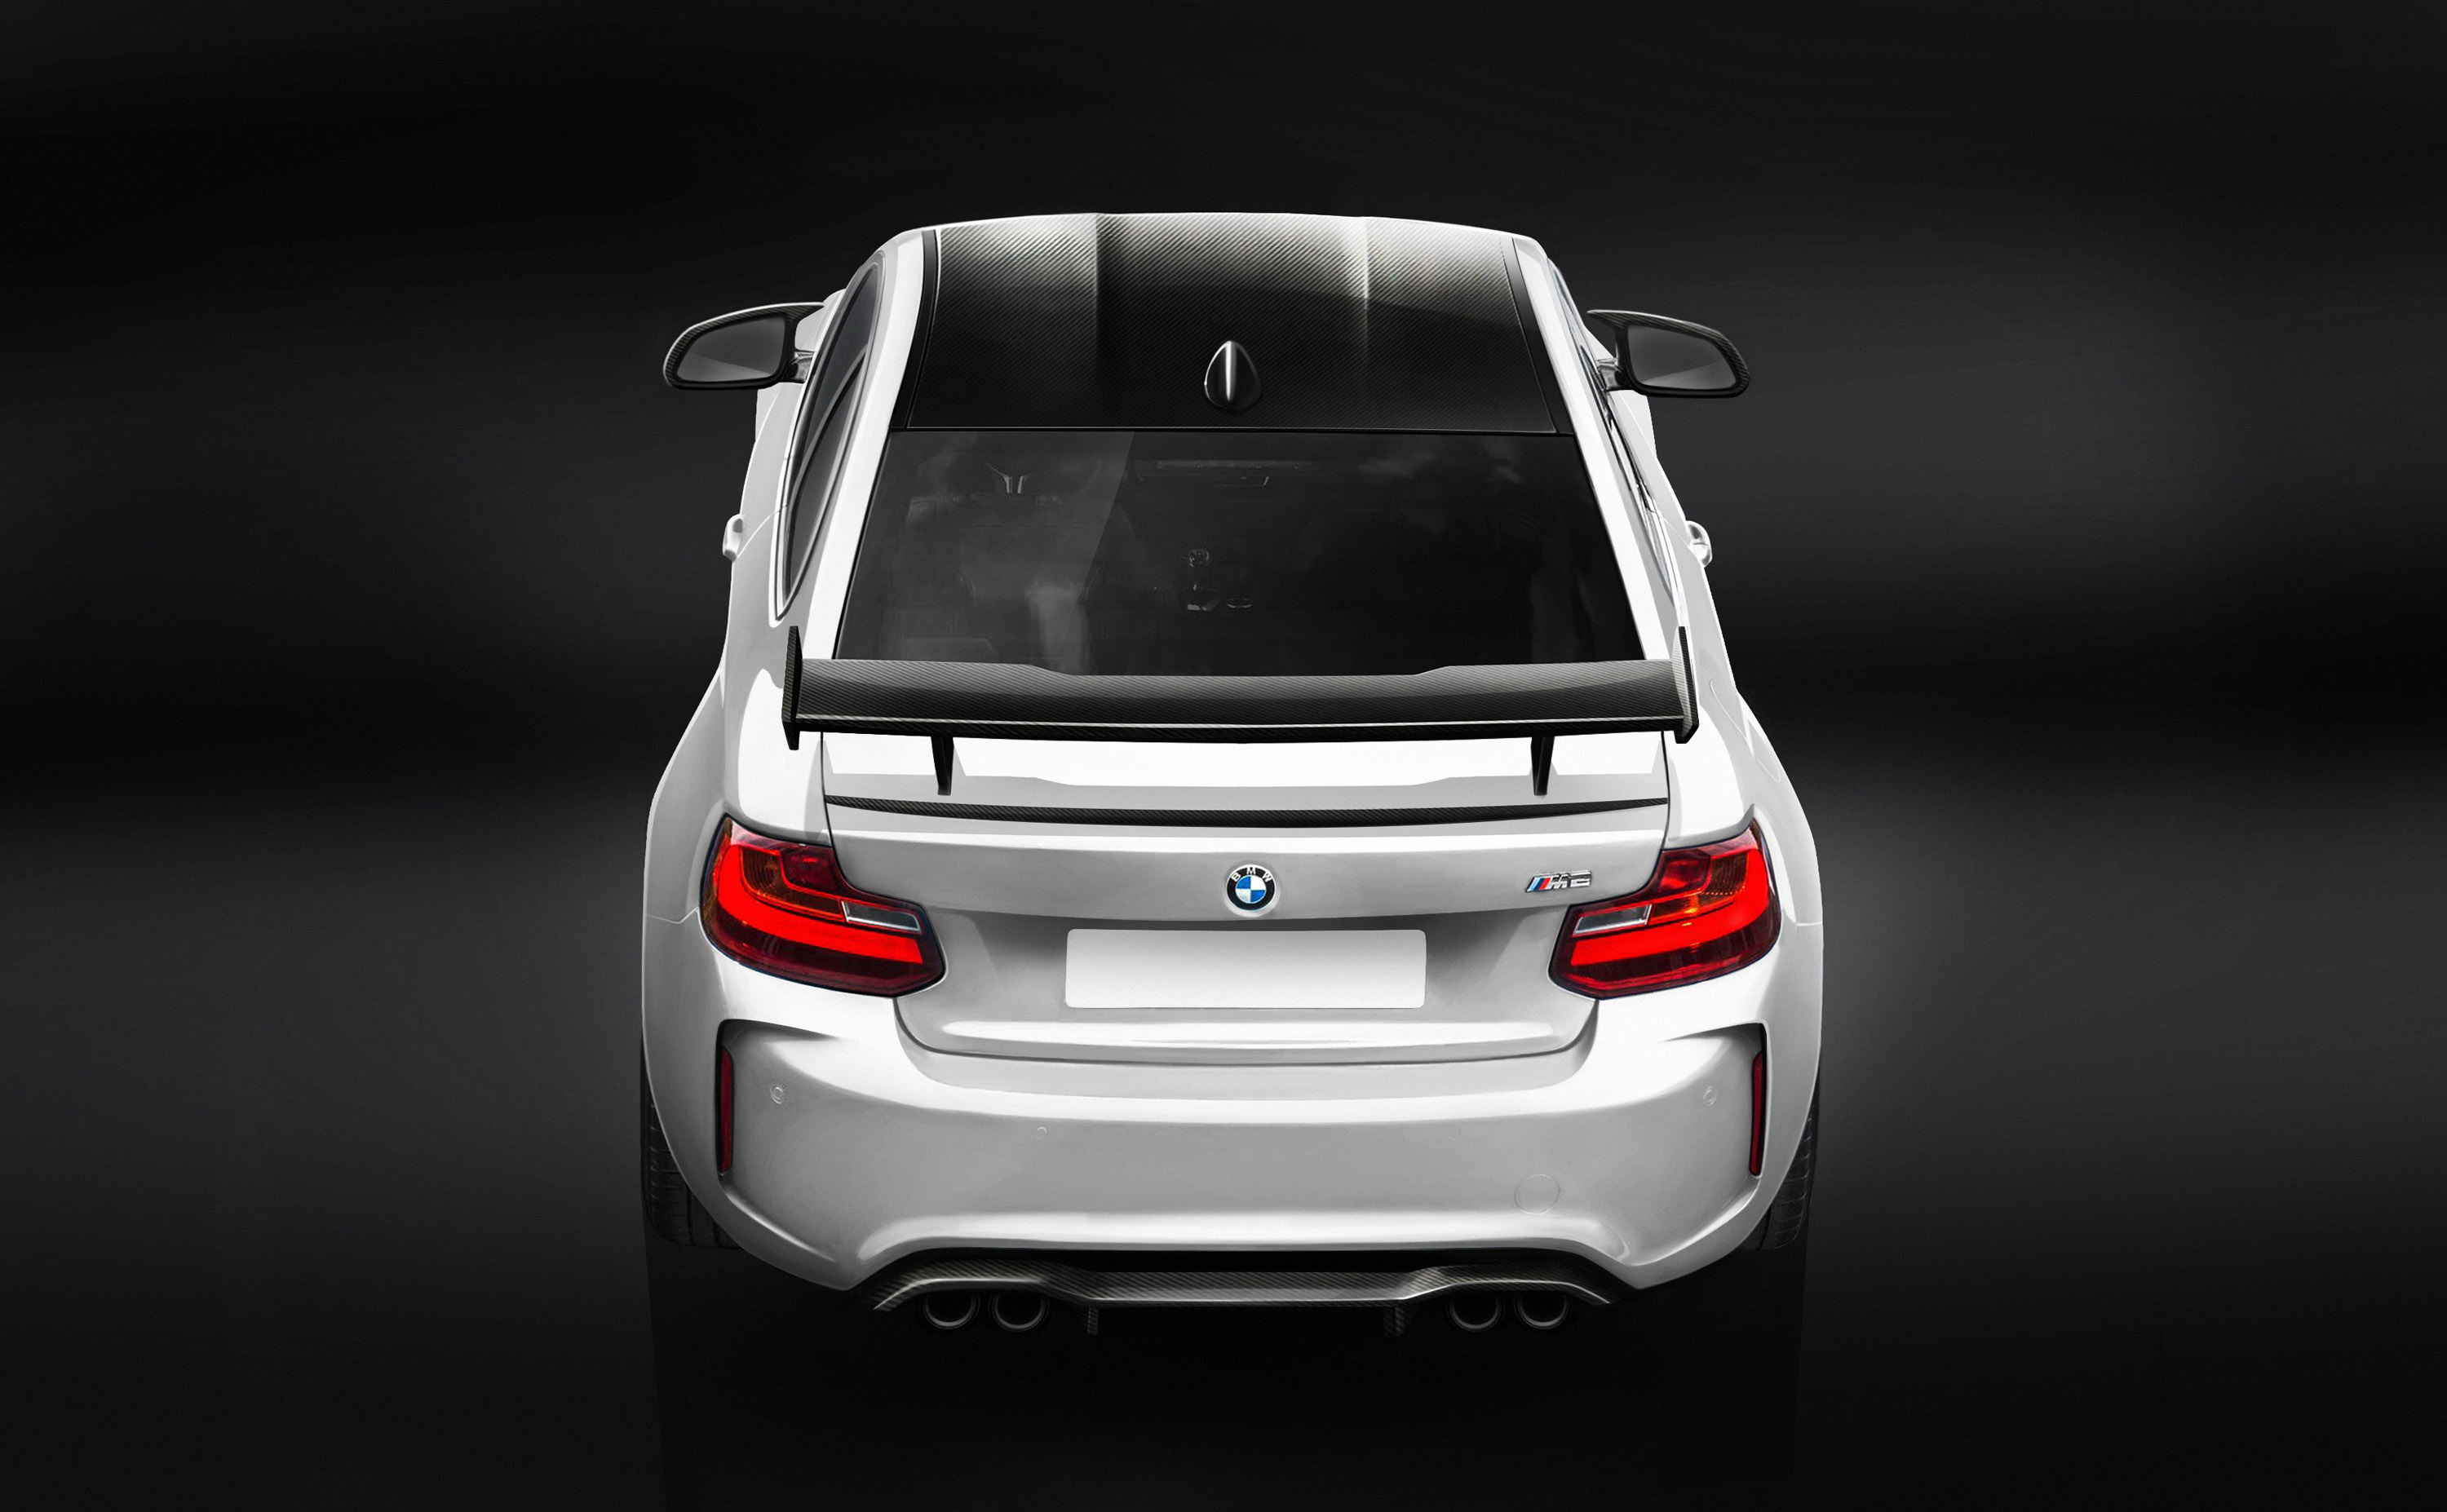 Alpha-N Performance BMW M2 Coupe